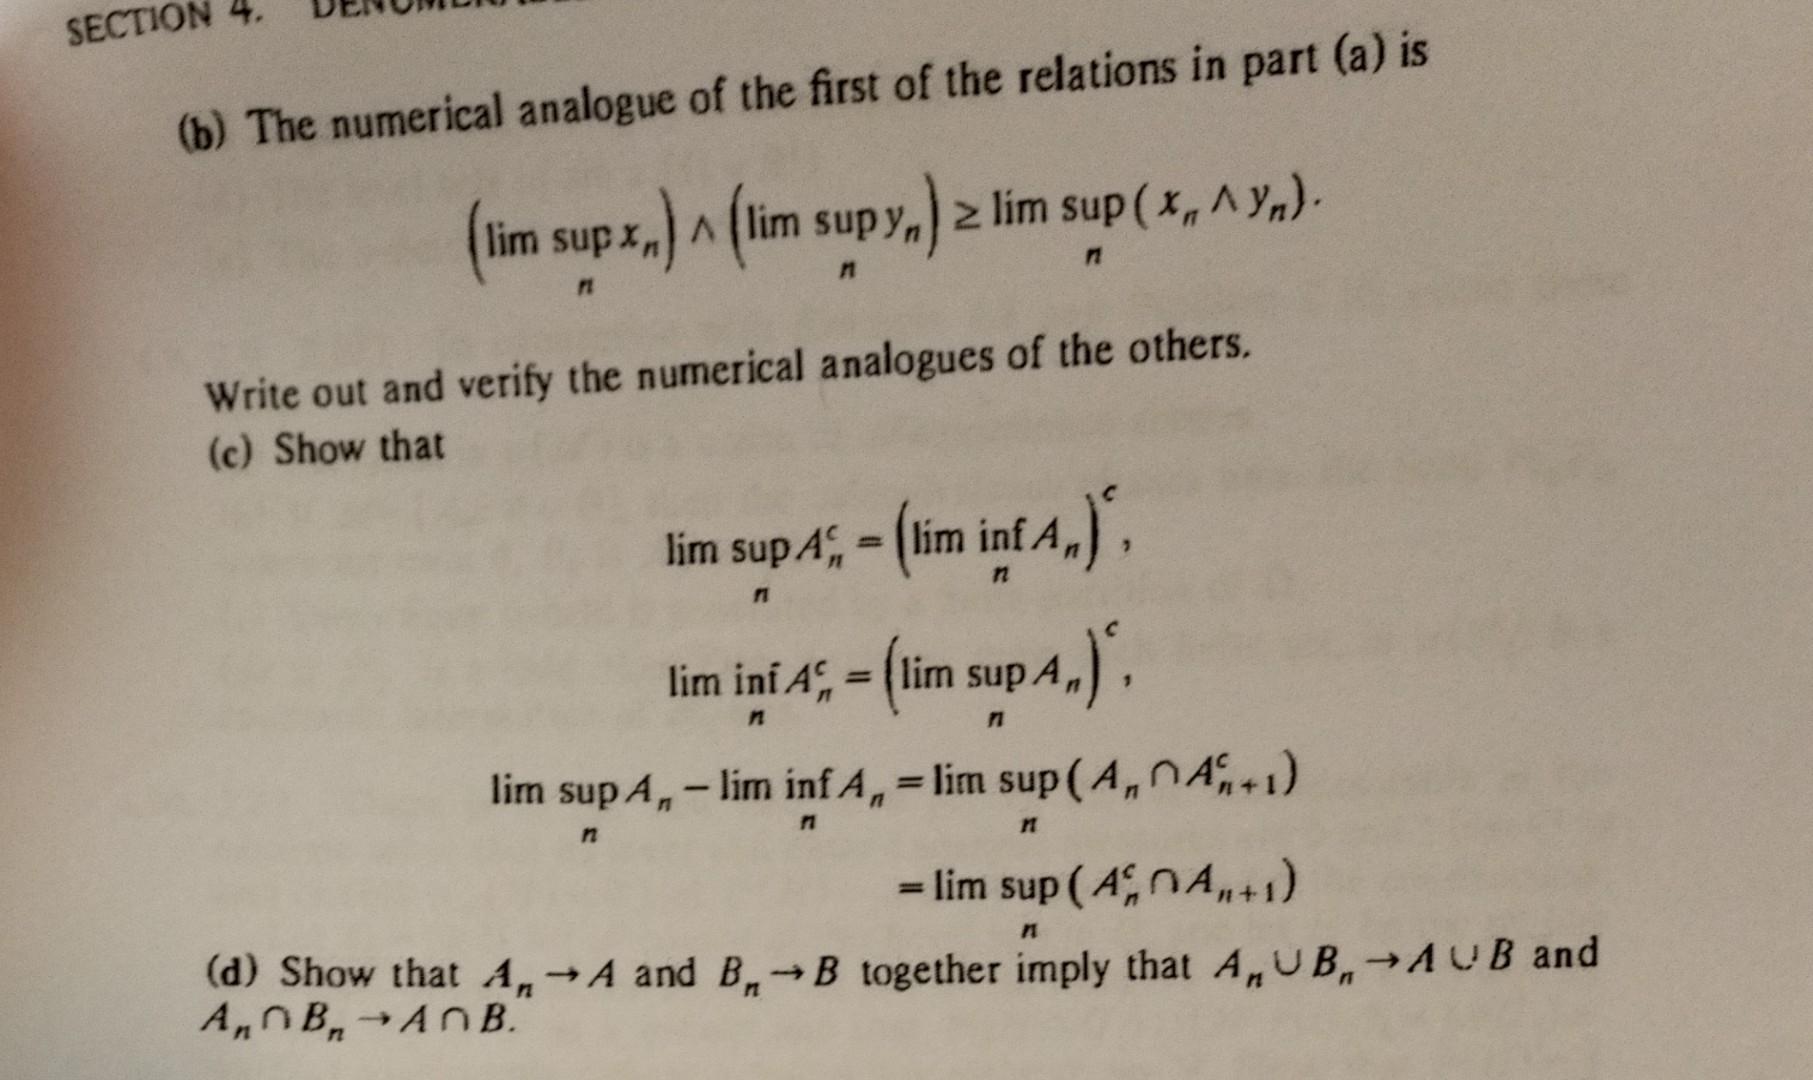 SECTION 4. (b) The numerical analogue of the first of the relations in part (a) is (lim supx)^(lim supy) 2 lm